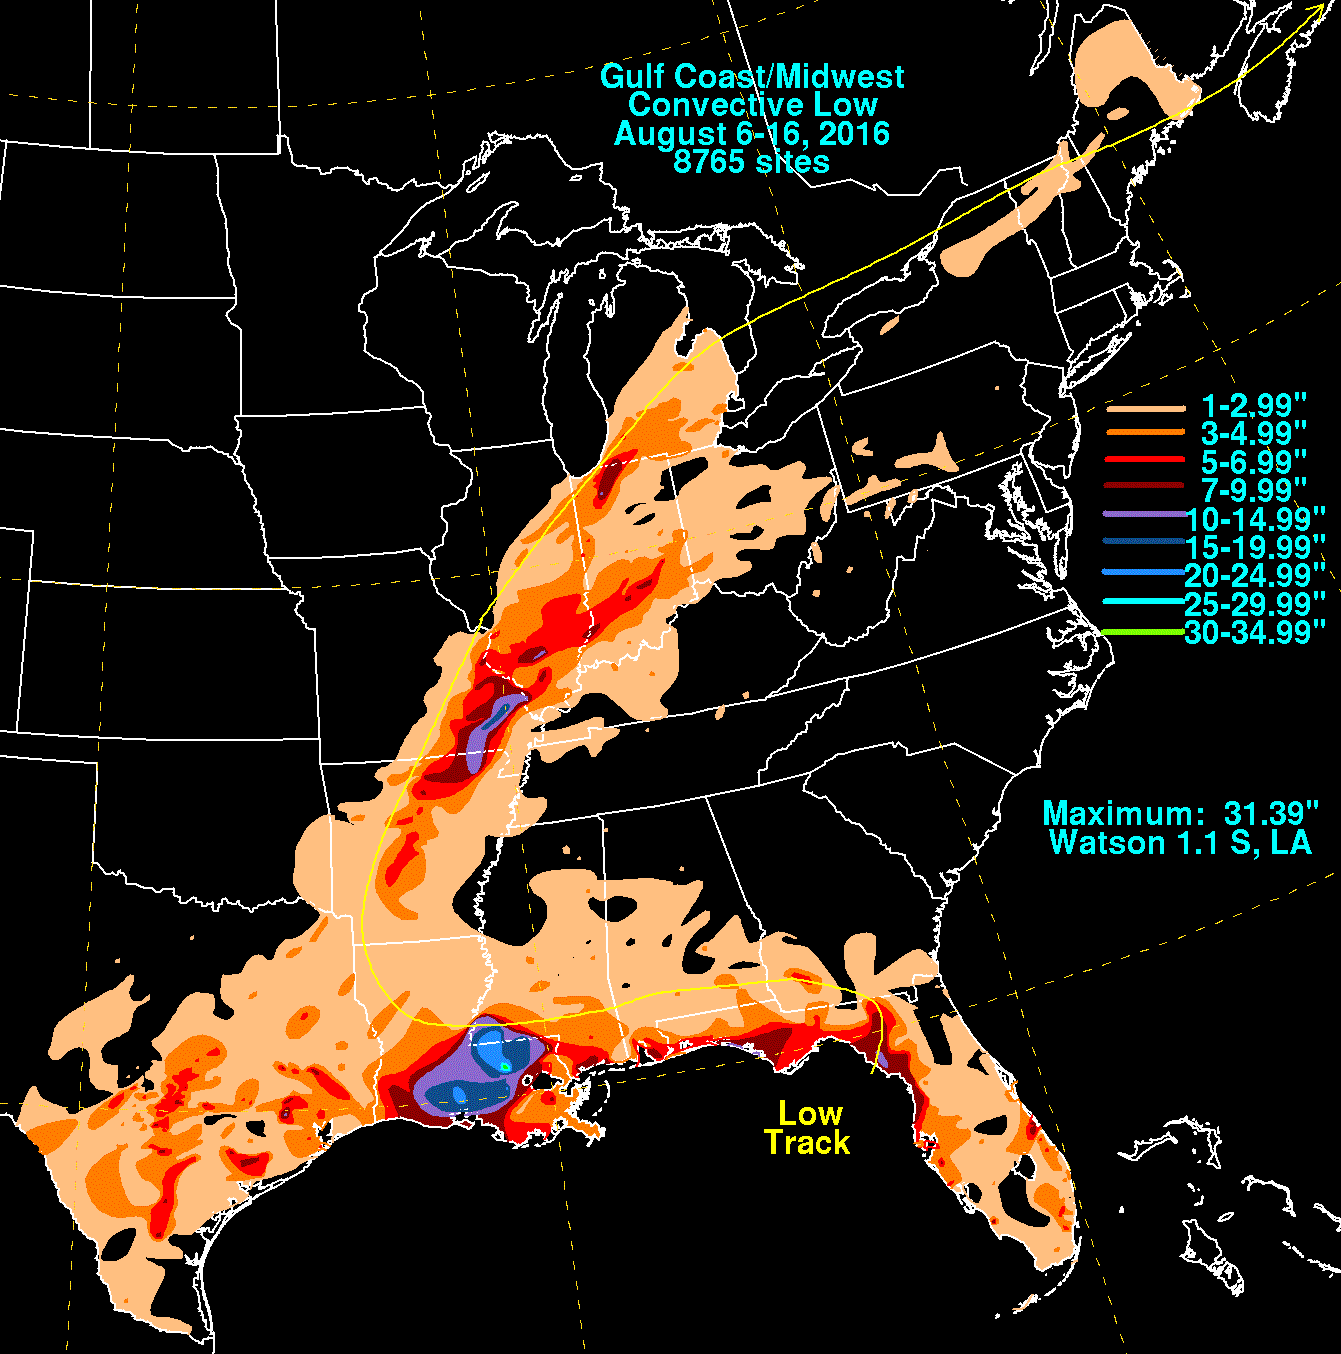 Convective Low (August 2016) Rainfall